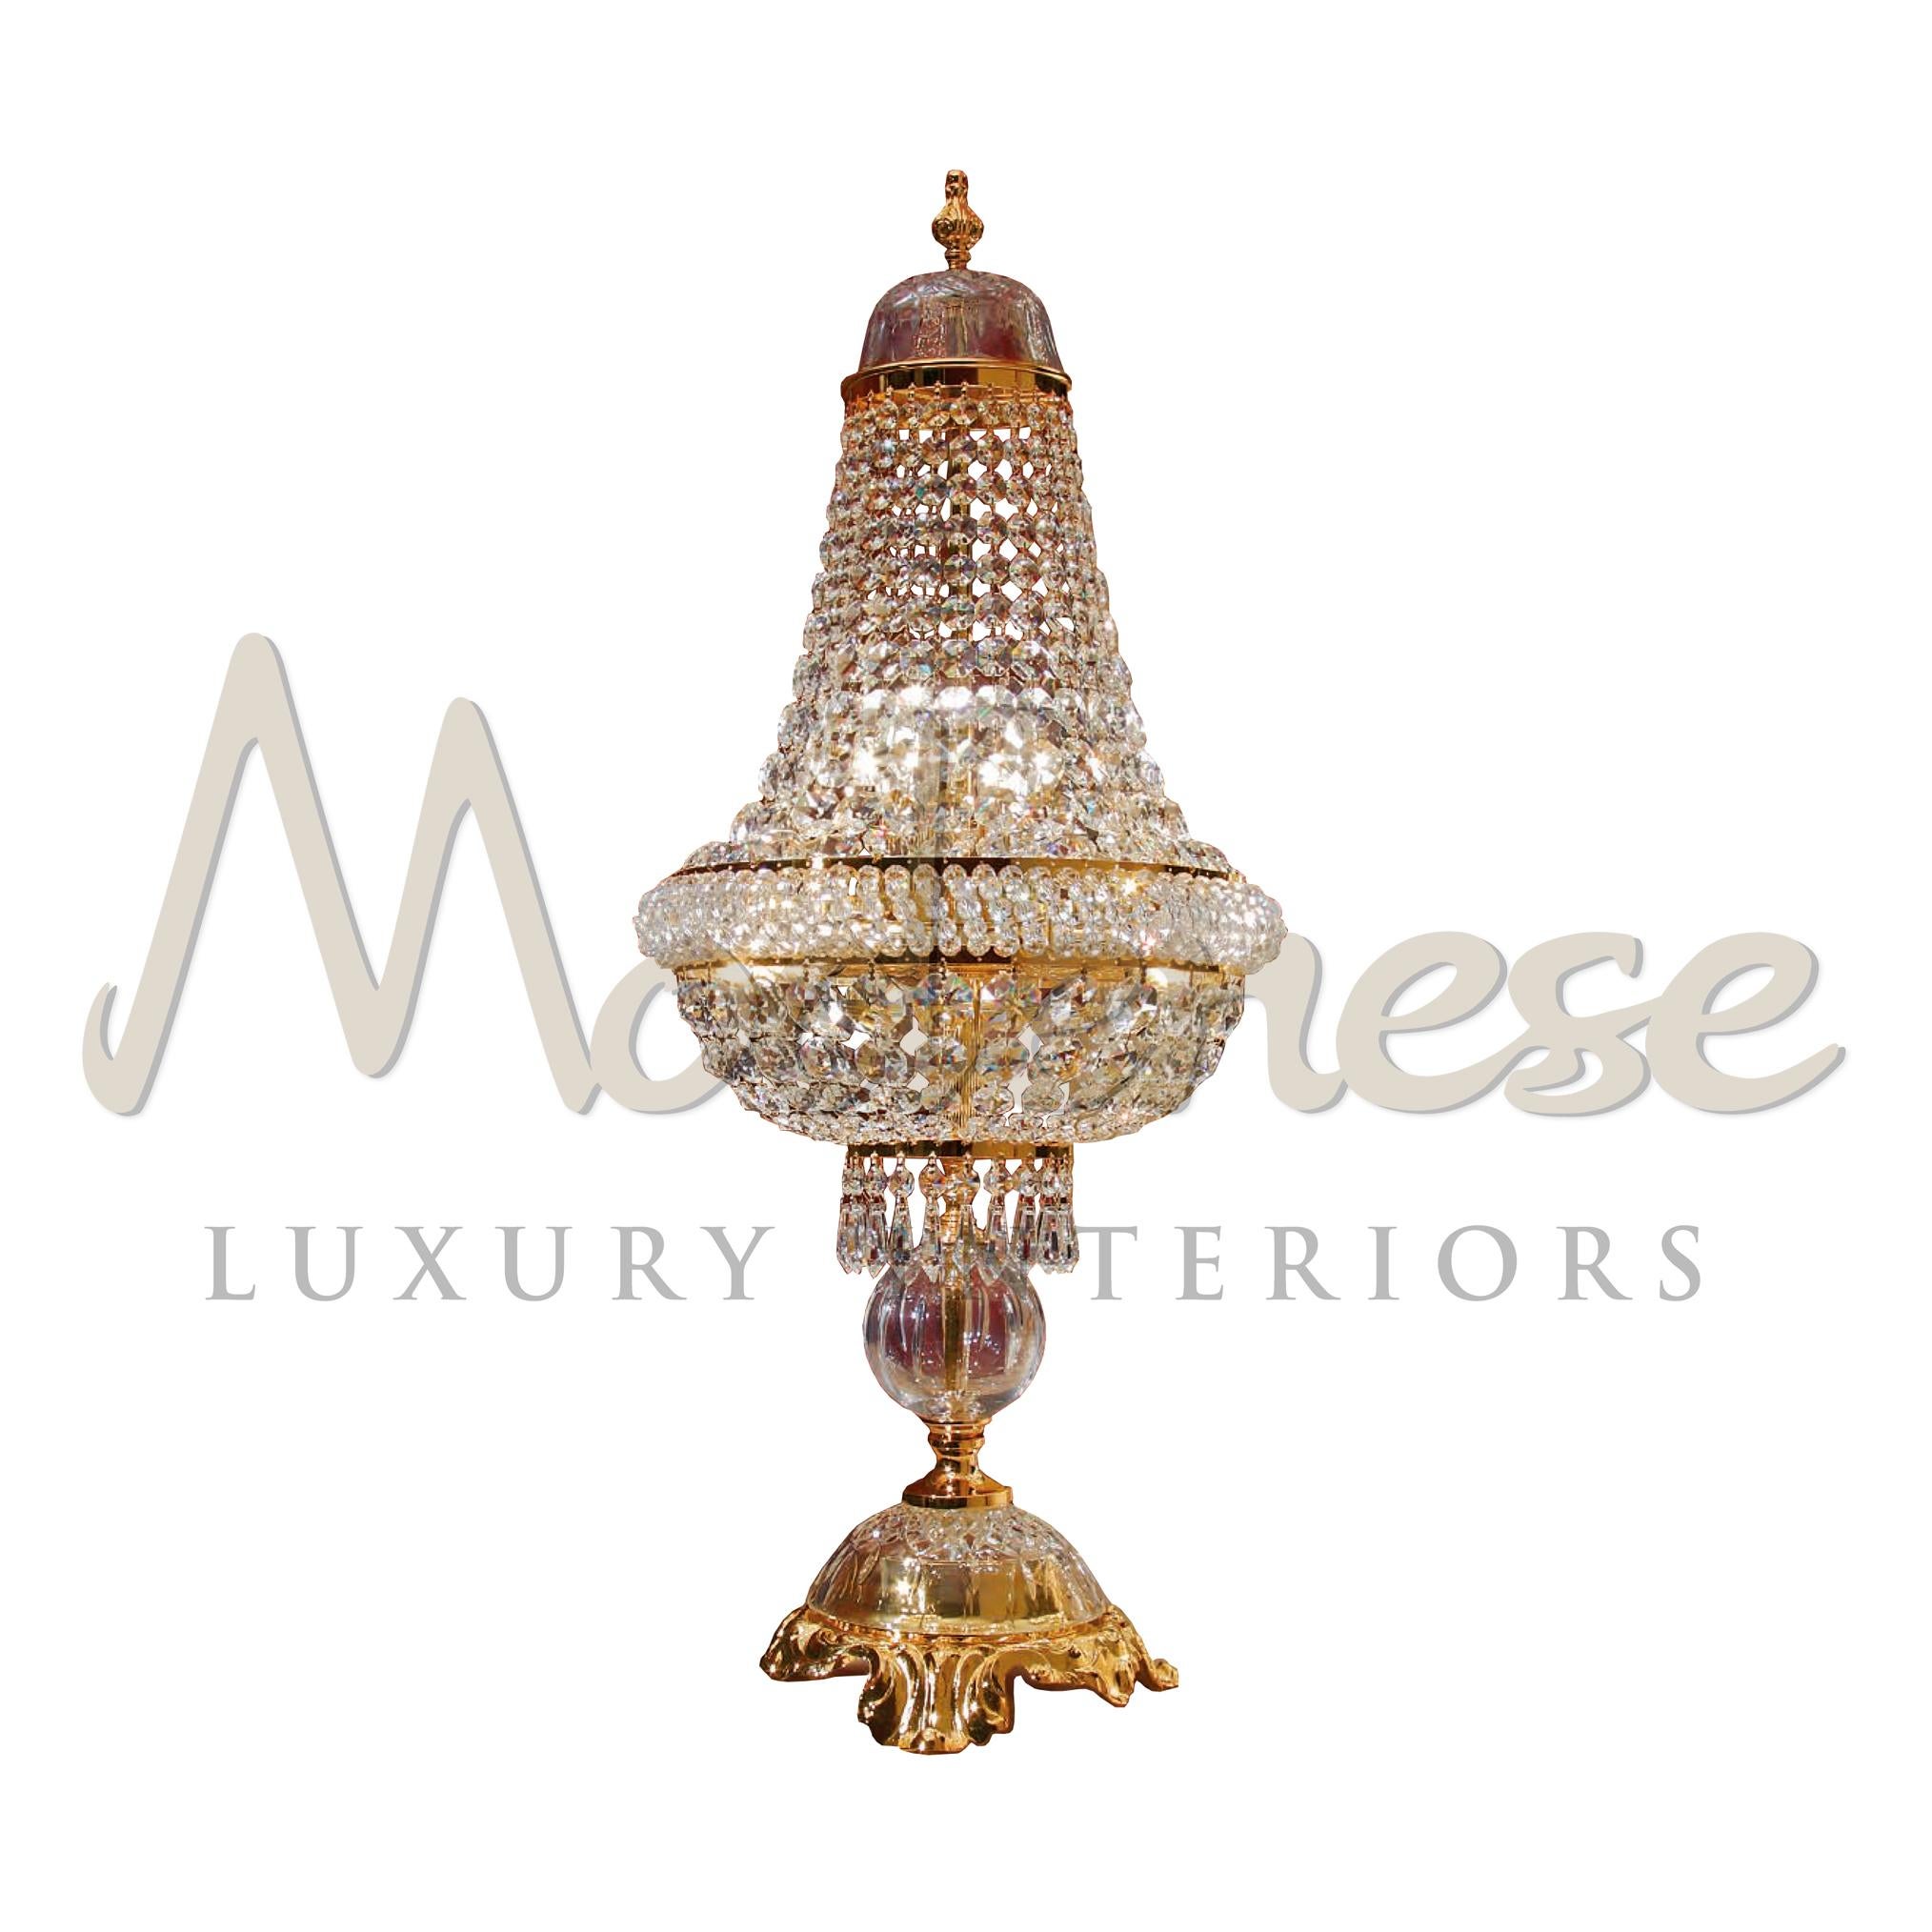 Rococo Revival 5 Lights Table Lamp in 24kt Gold Finish Embellished with Clear Scholer Crystals For Sale